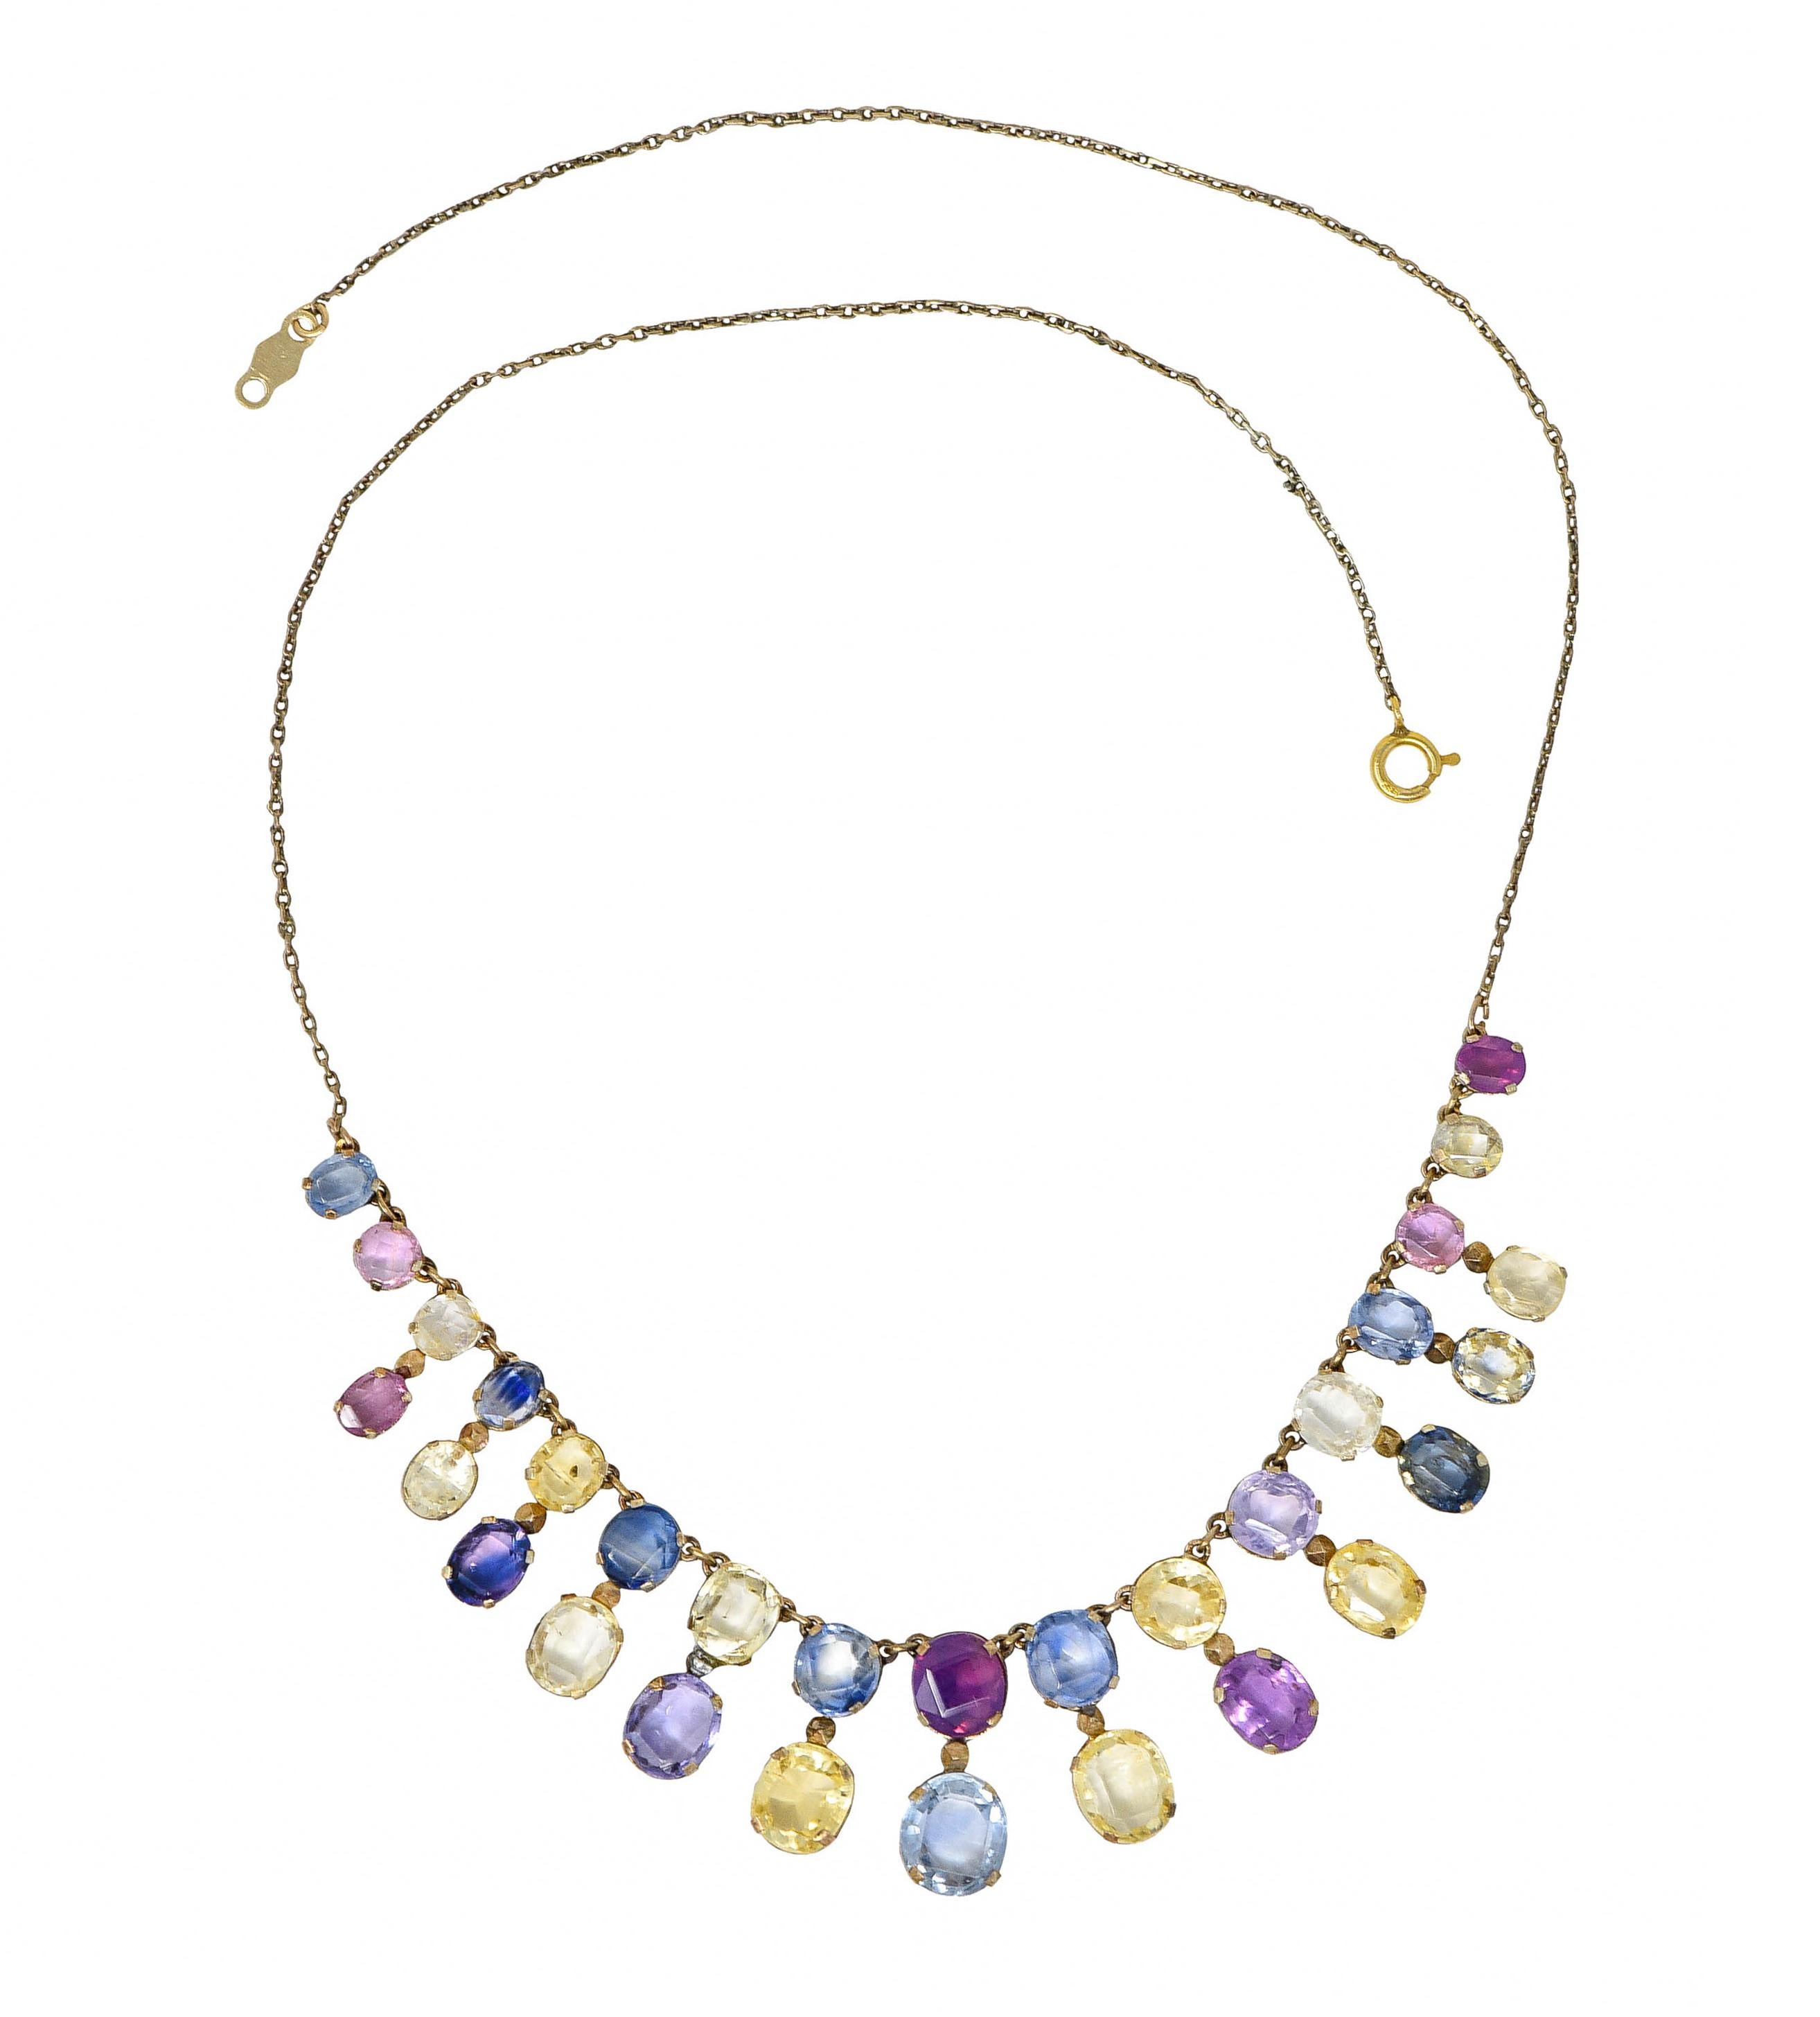 Cable chain necklace features oval, round, and cushion cut sapphires as fringe droplets

Transparent to translucent with pastel to medium light color 

Pink, yellow, blue, and lavender with some exhibiting bi-color saturation

Weighing in total